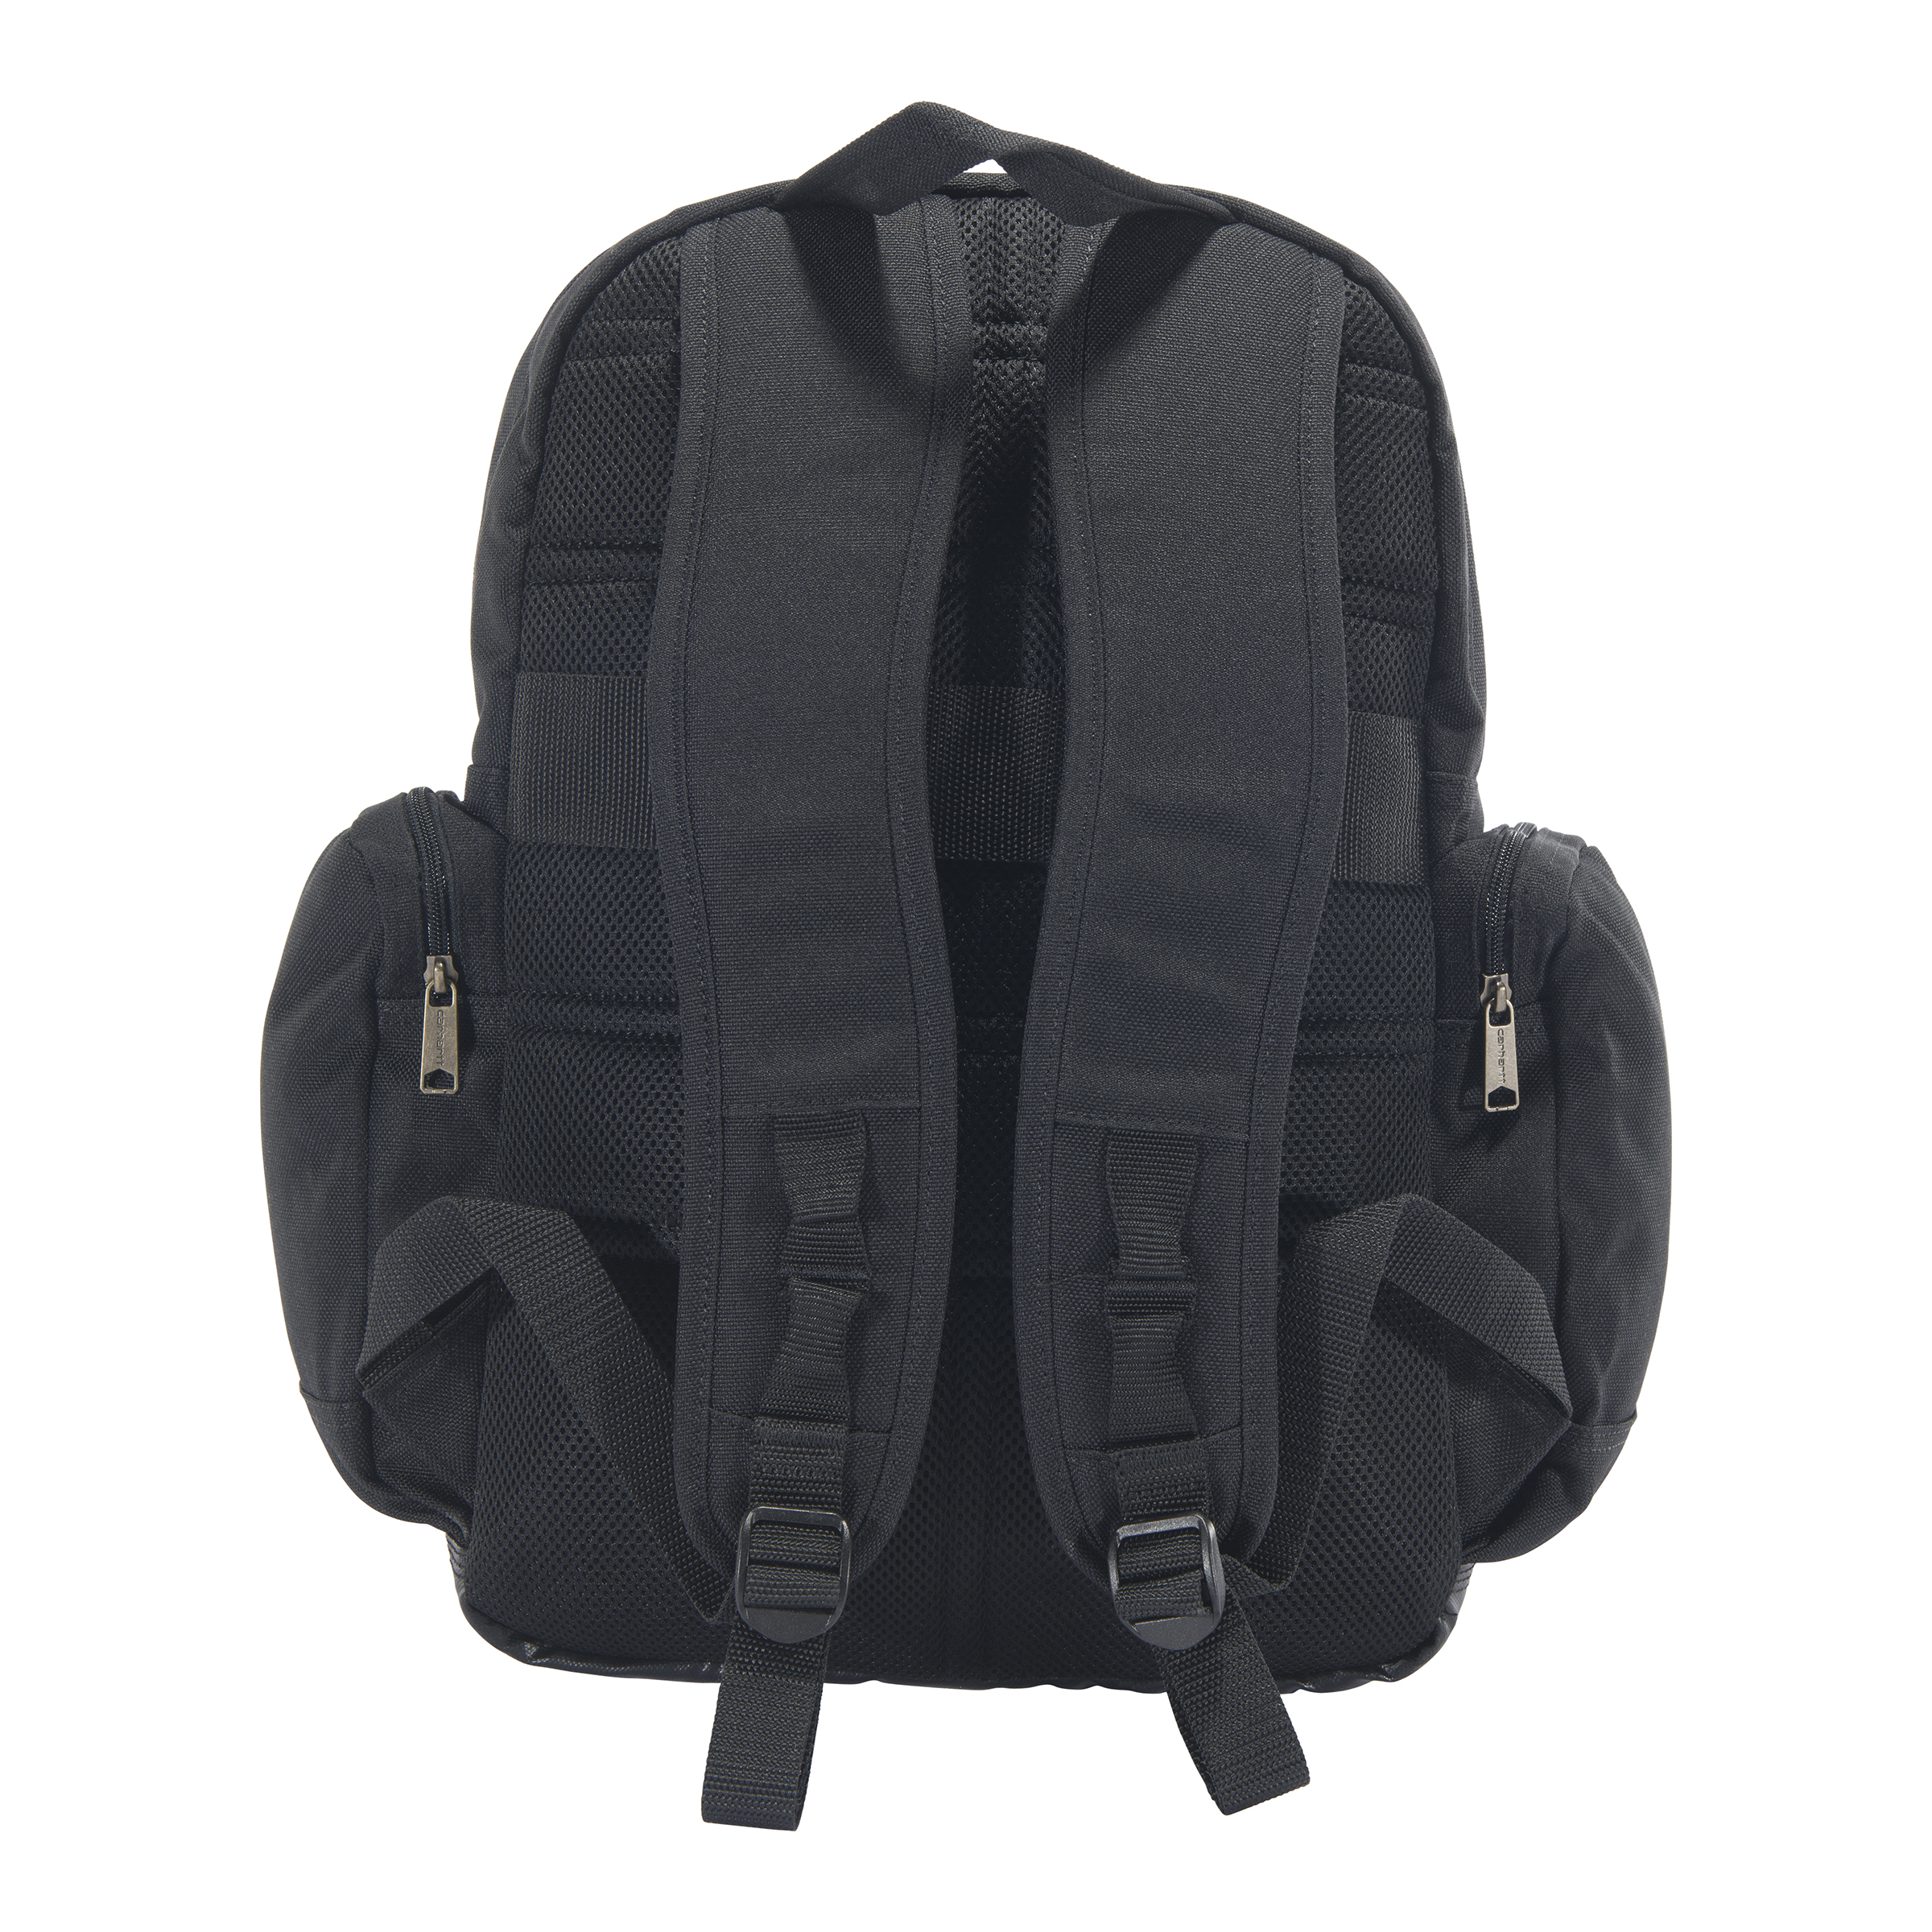 Picture of Carhartt B0000277 Mens 35L Triple-Compartment Backpack